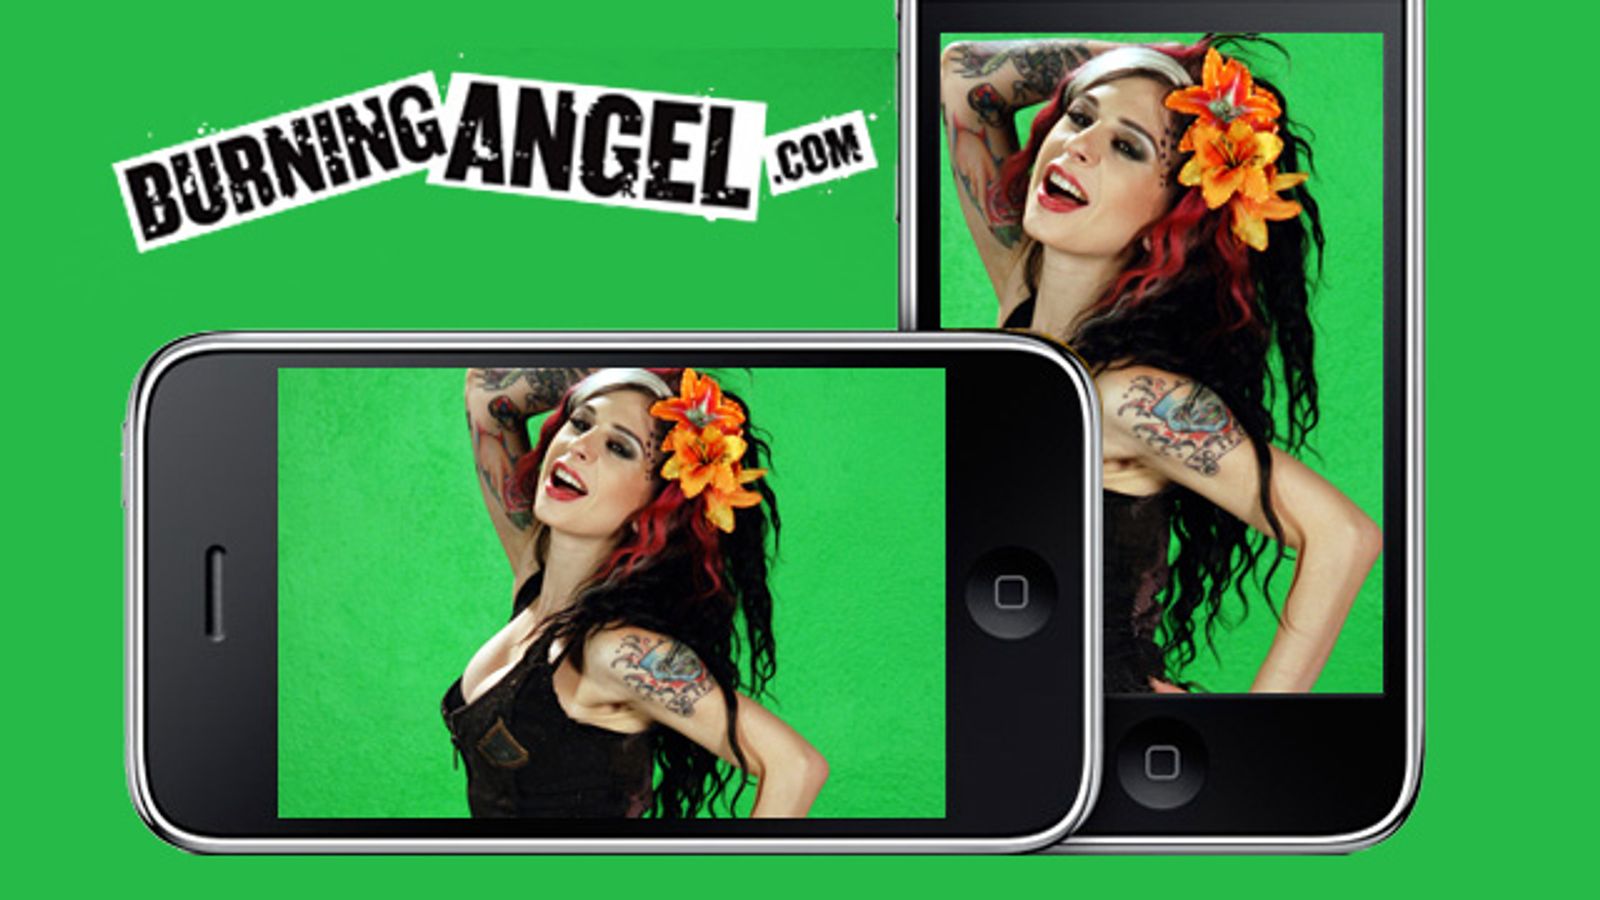 BurningAngel Partners With Totalmass to Launch Mobile App